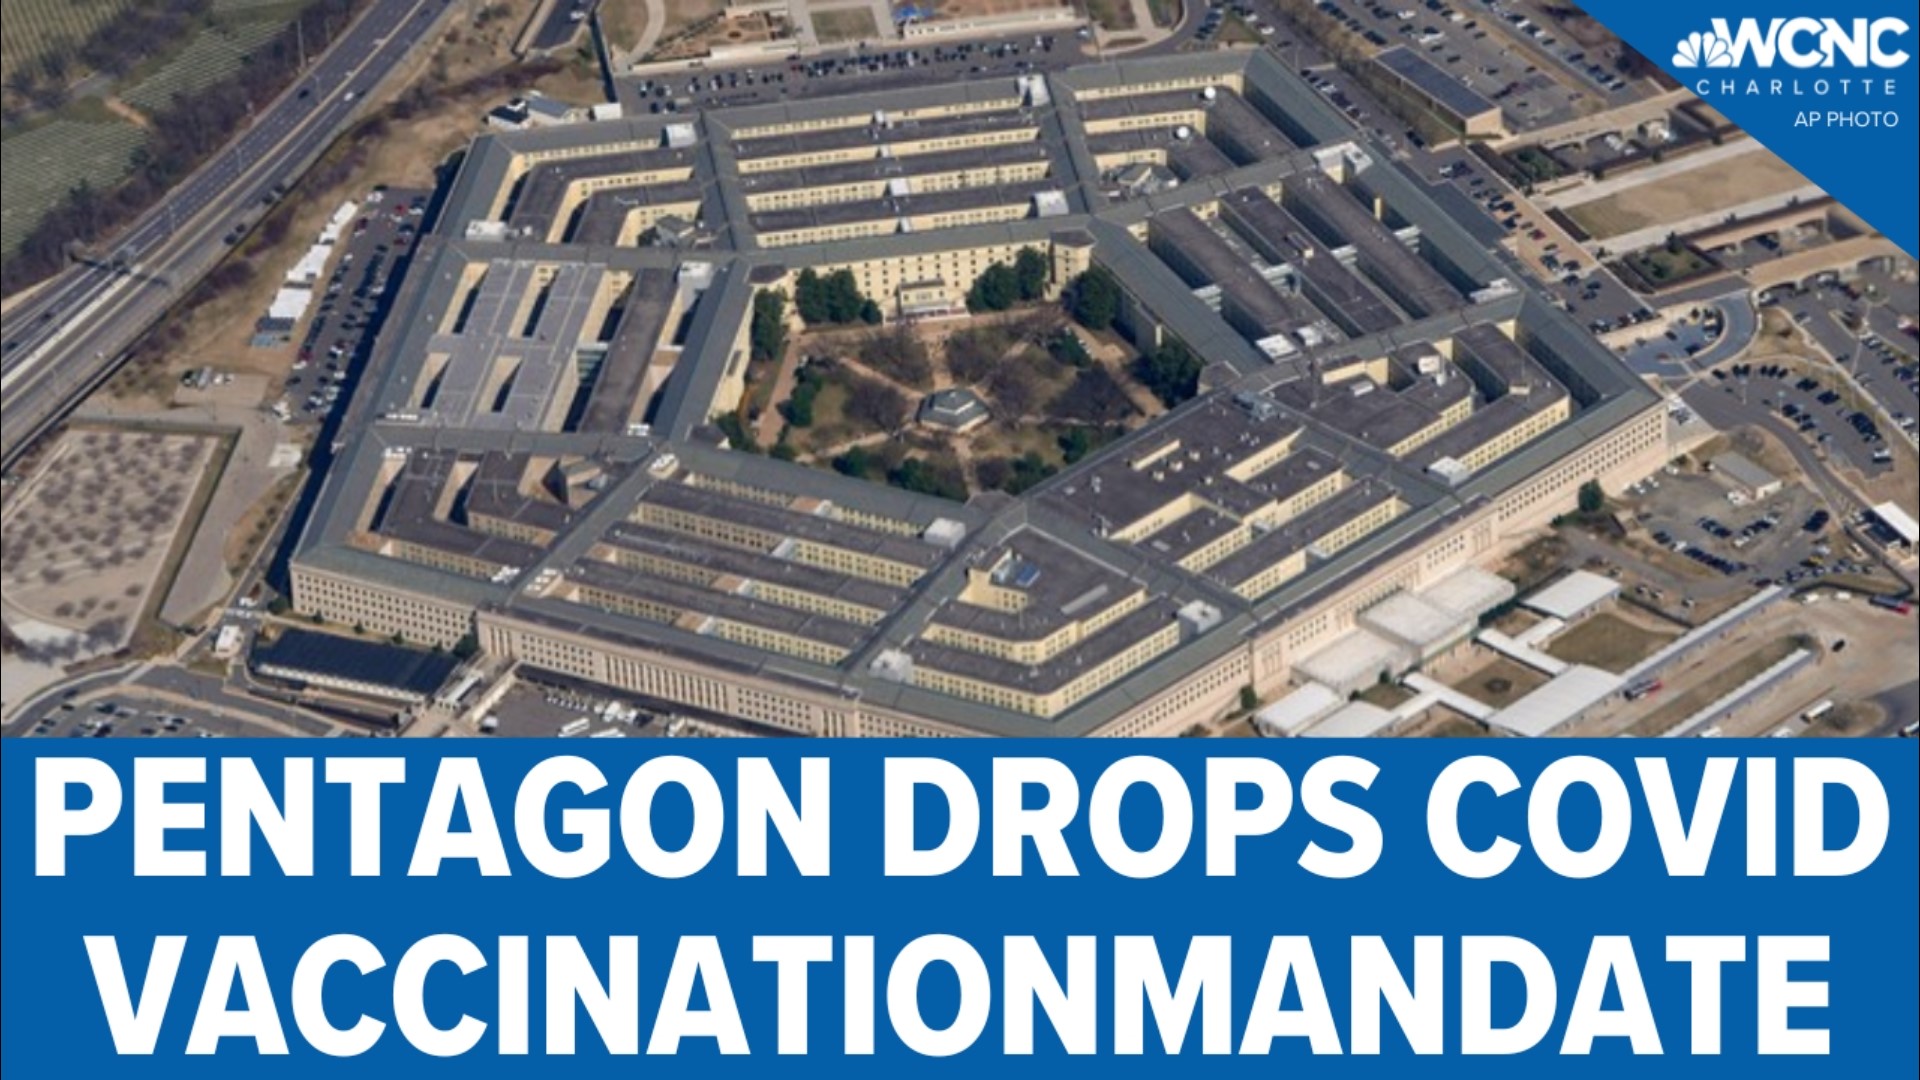 The Pentagon has formally dropped its COVID-19 vaccination mandate.